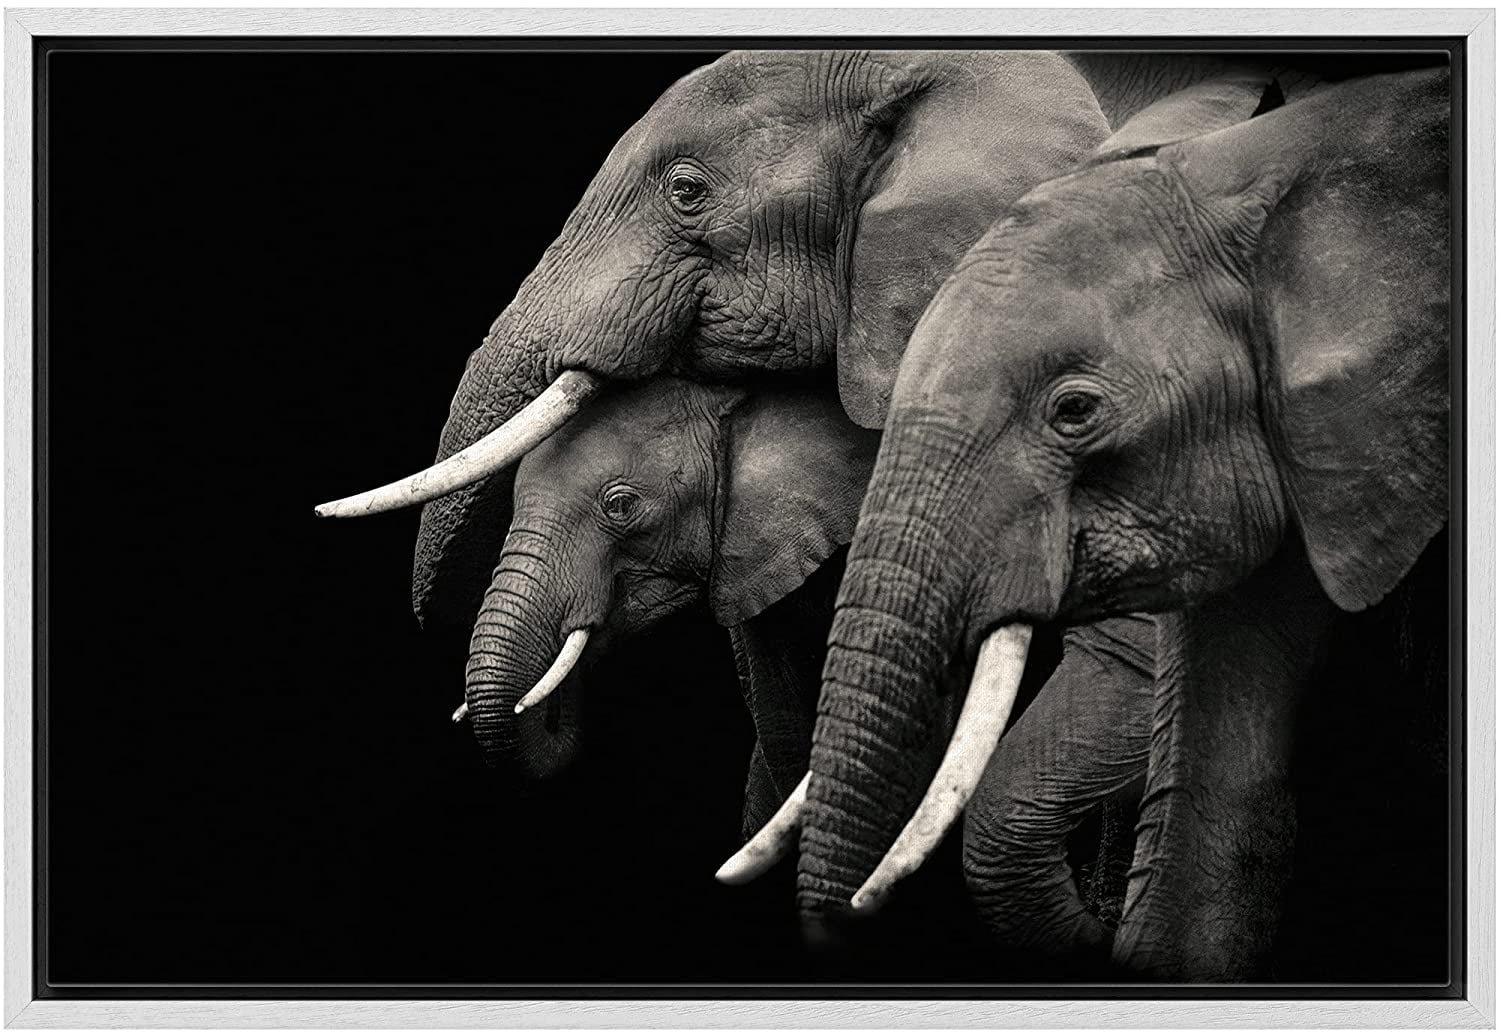 wall26 Framed Canvas Wall Art for Living Room, Bedroom Family of Elephants  I Canvas Prints for Home Decoration Ready to Hang - 24x36 inches